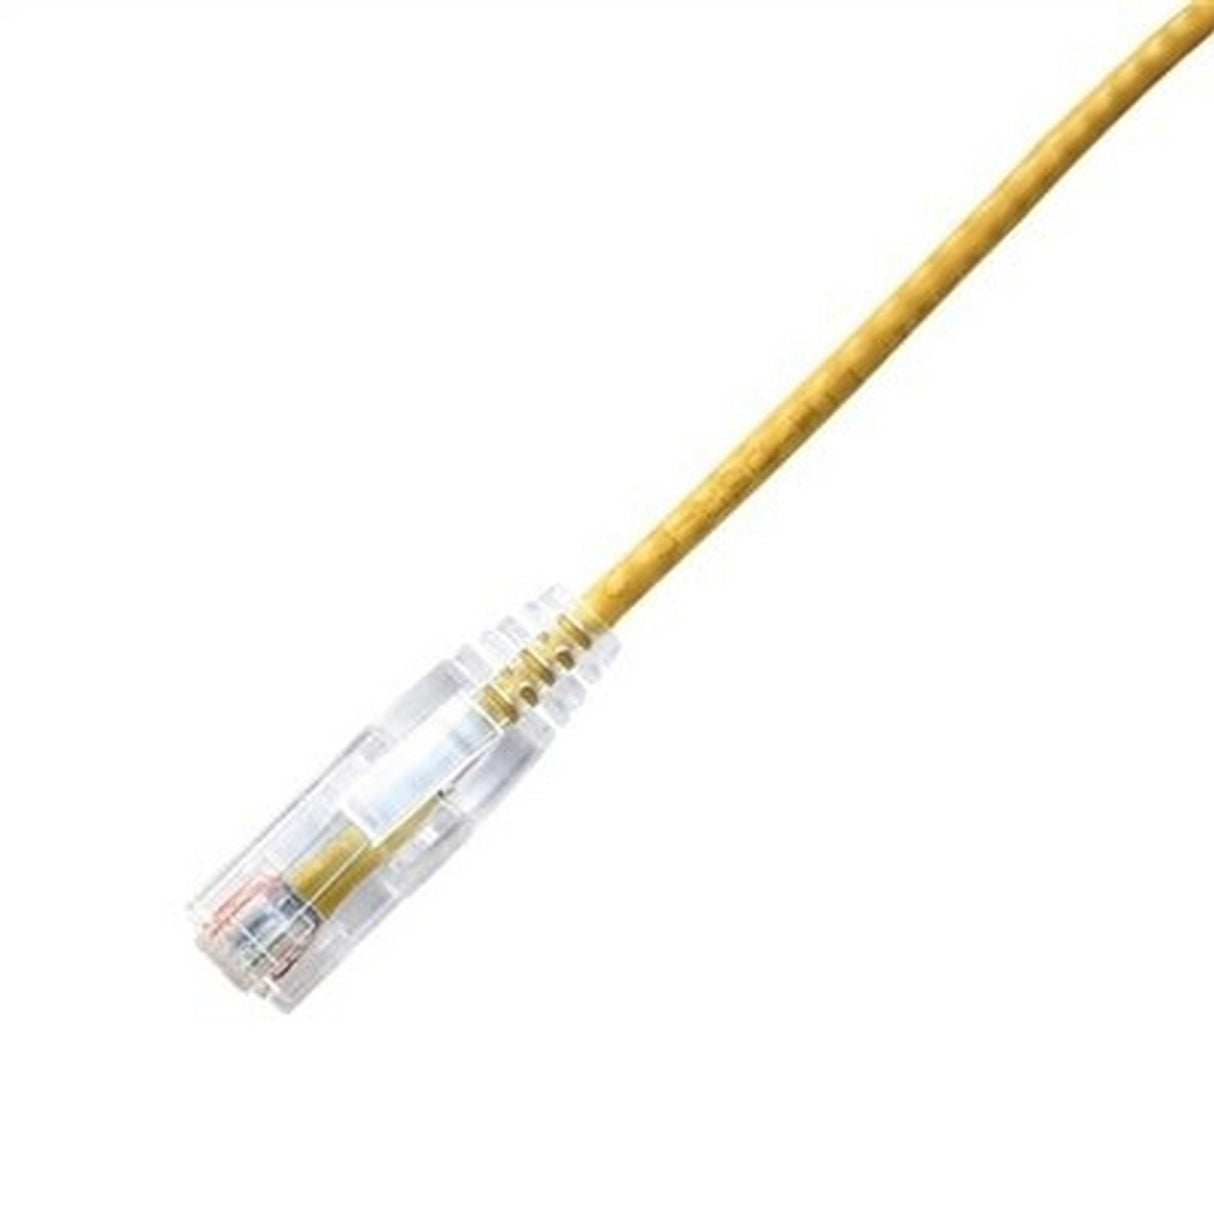 LYNN CPCS-AYE-003F CHOICE Slim 28AWG CAT6A Ethernet Patch Cable, 3-Foot, Yellow